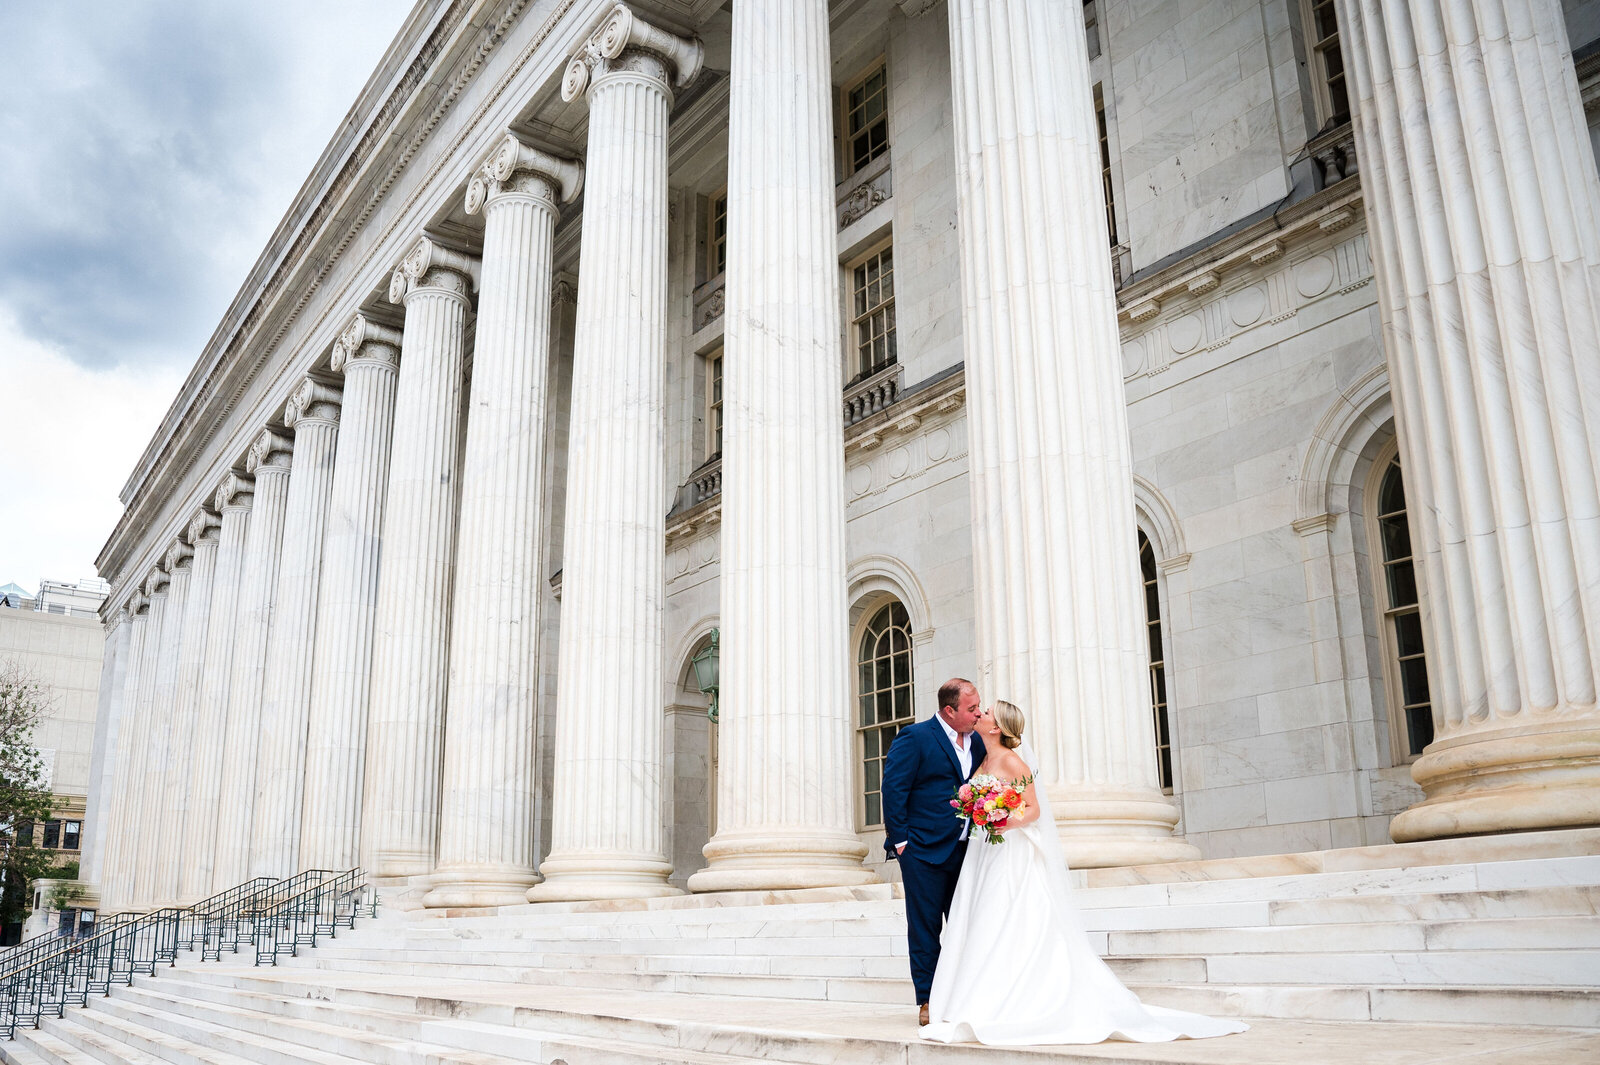 A bride and groom share a kiss on the front steps of a downtown Denver building.